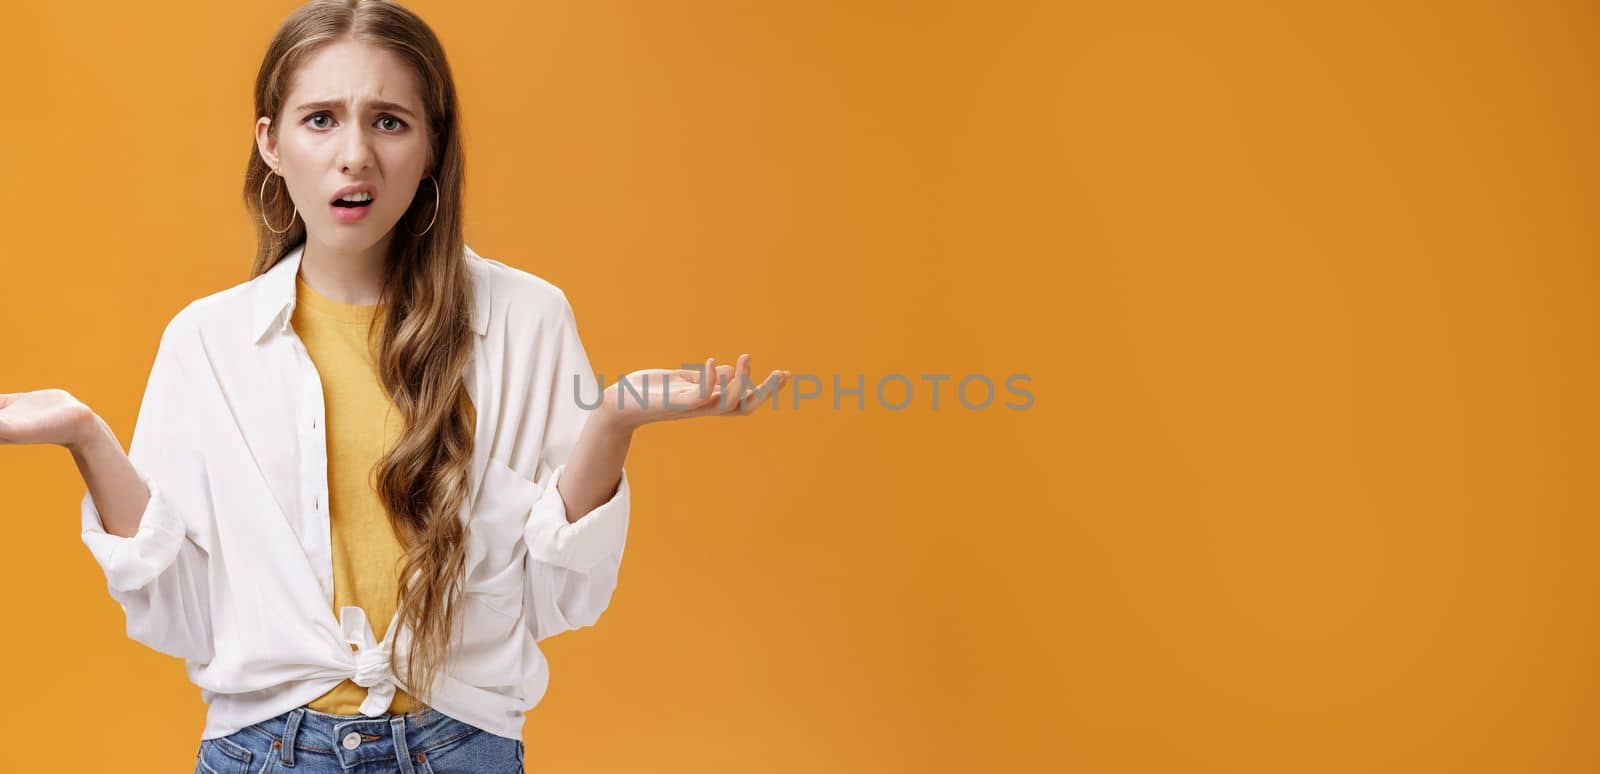 What, I do not understand. Portrait of arrogant questioned impolite girl being pissed with questiones shrugging with hands spread sideways making irritated grimace standing confused over orange wall.